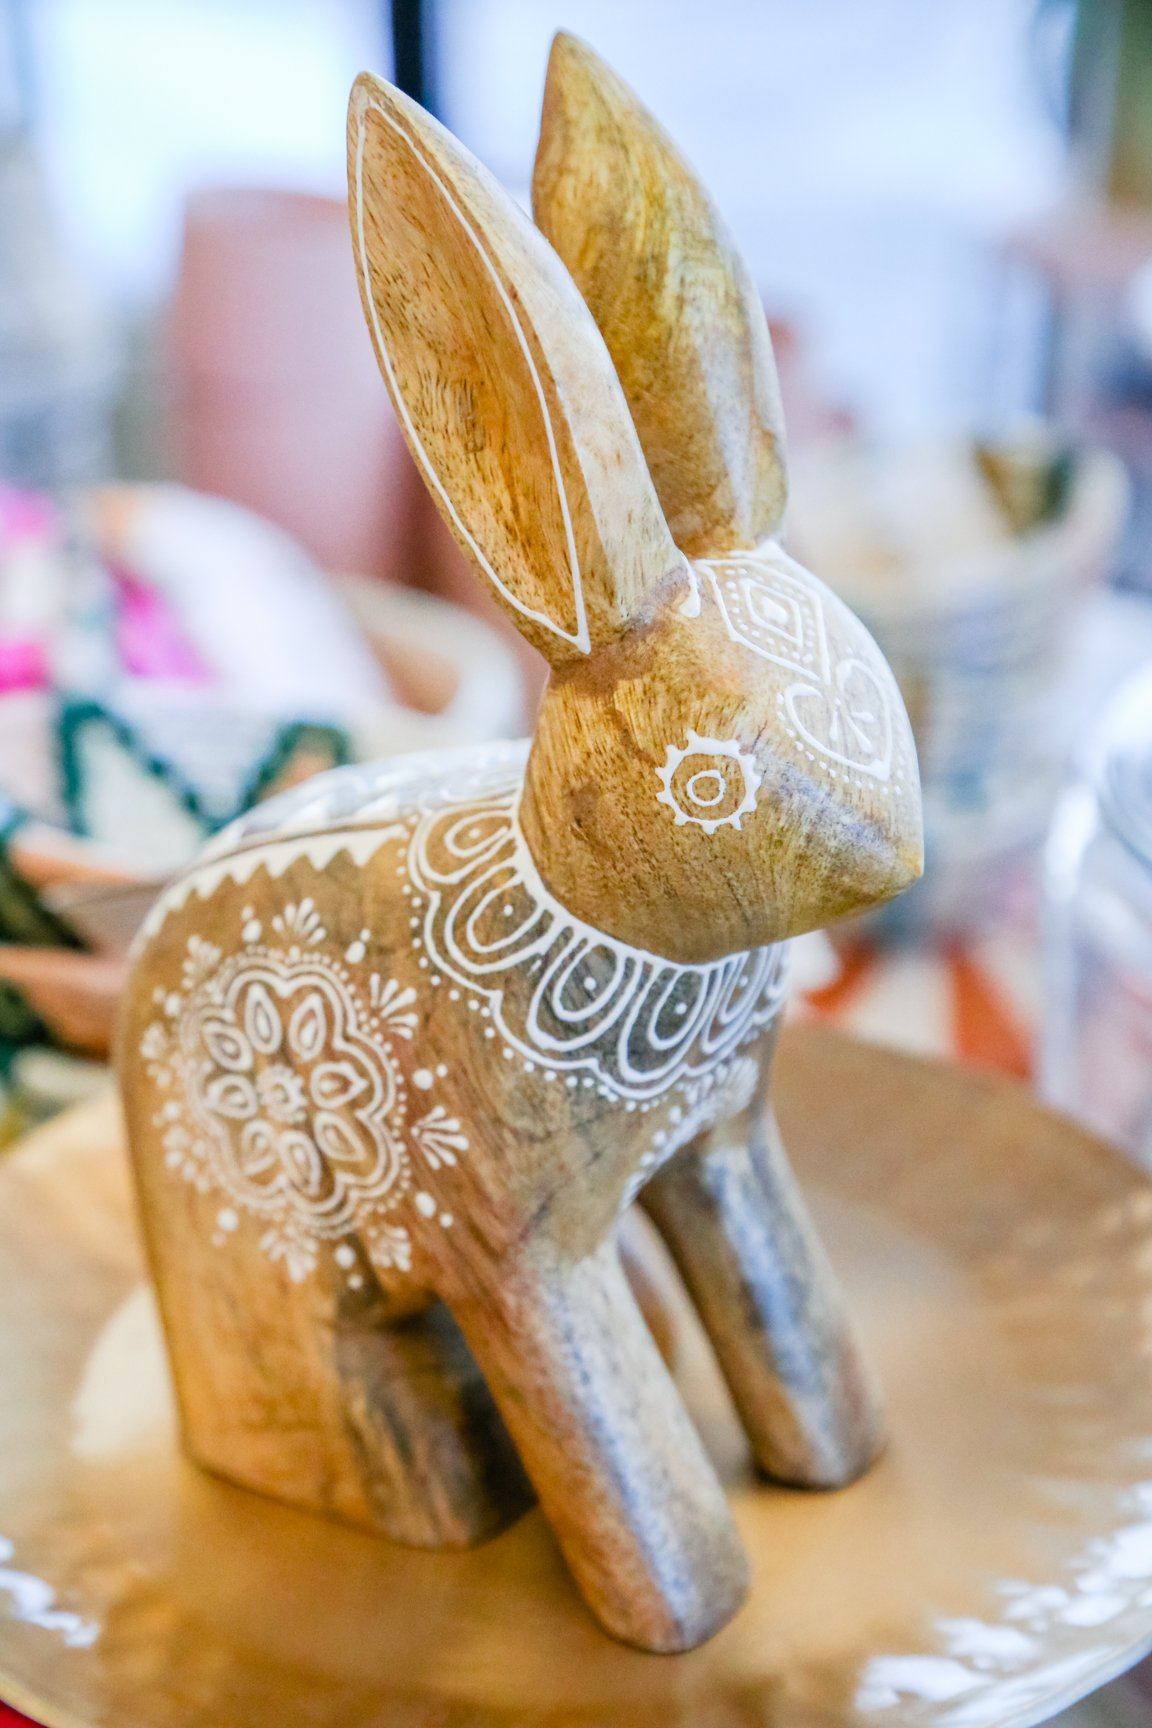 Hand Carved Bunny